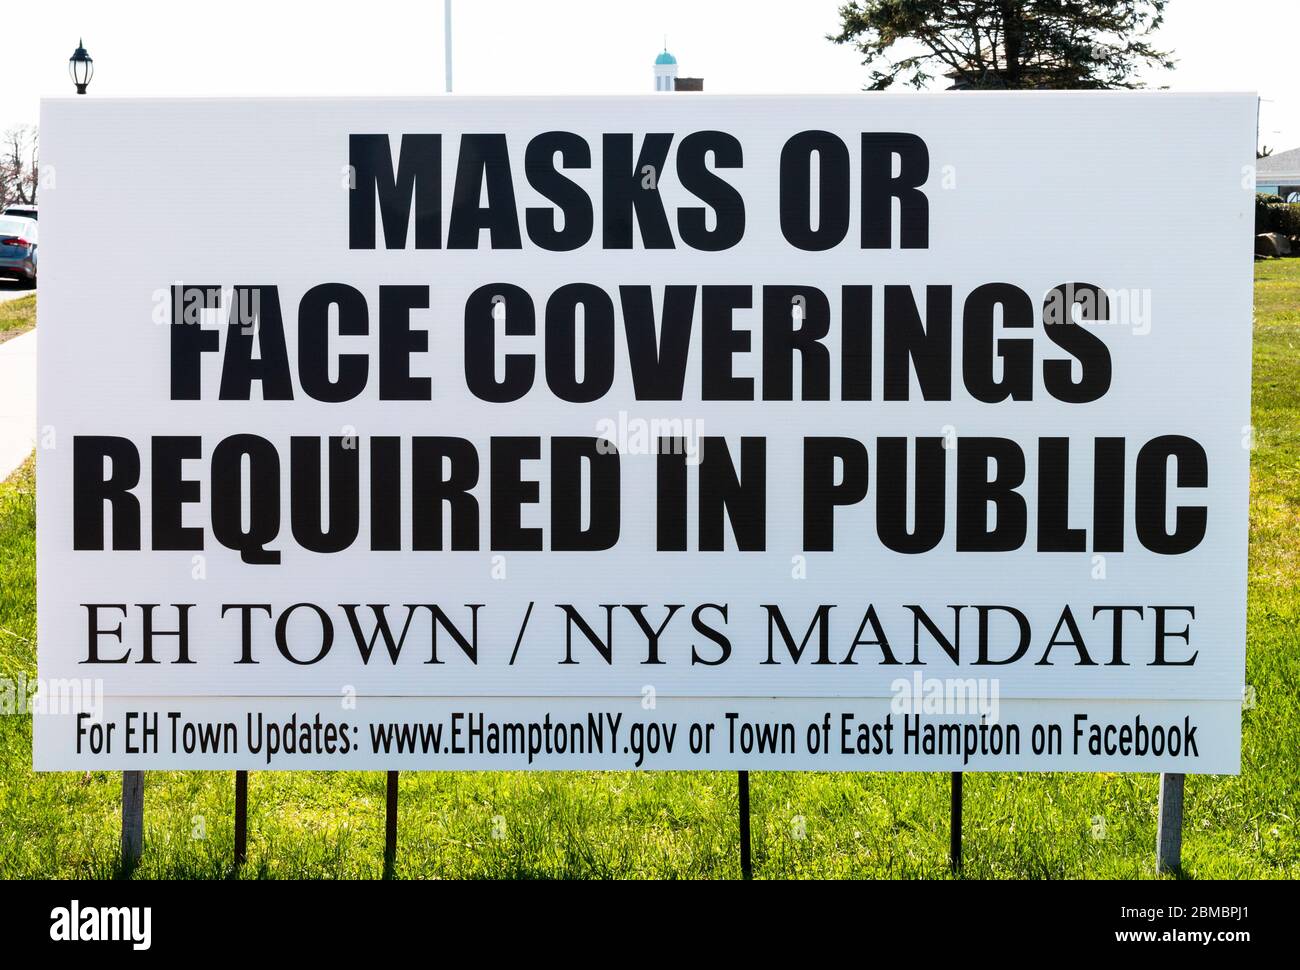 Montauk, New York, USA - 25 April 2020: A sign on the side of the road reads Mask or Face Covering Required in Public as you enter a village in the to Stock Photo